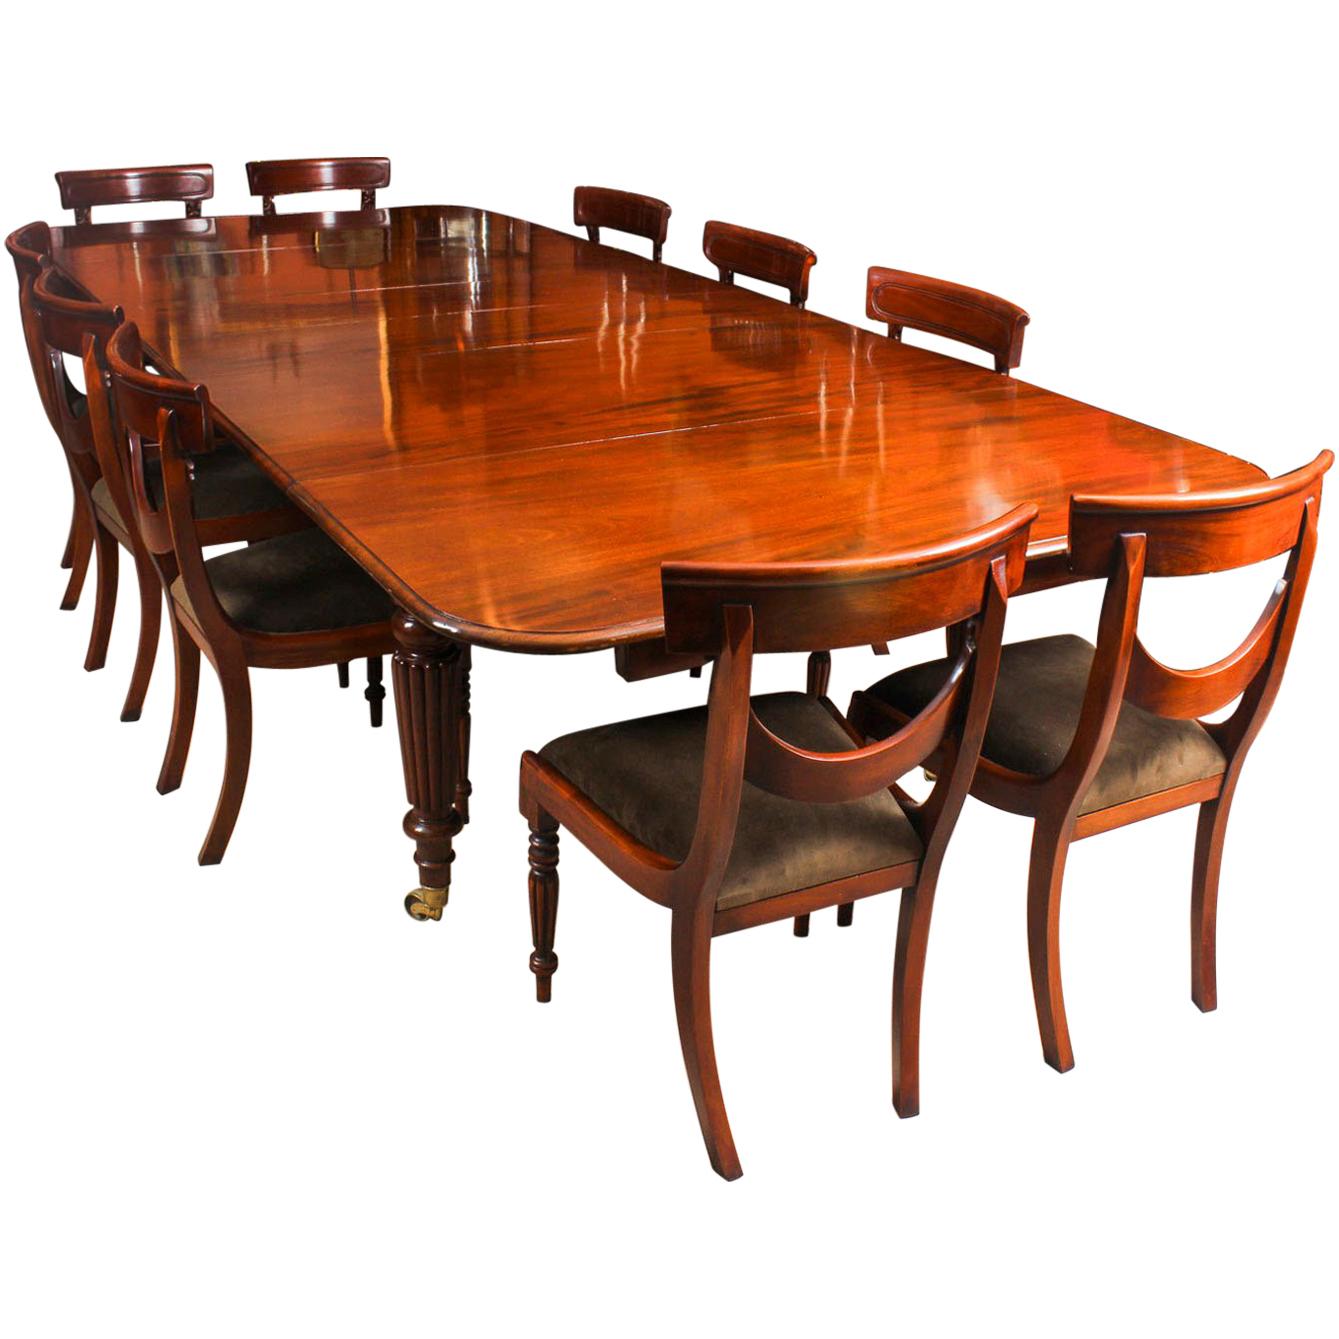 Antique Flame Mahogany Extending Dining Table 19th Century and 10 Chairs